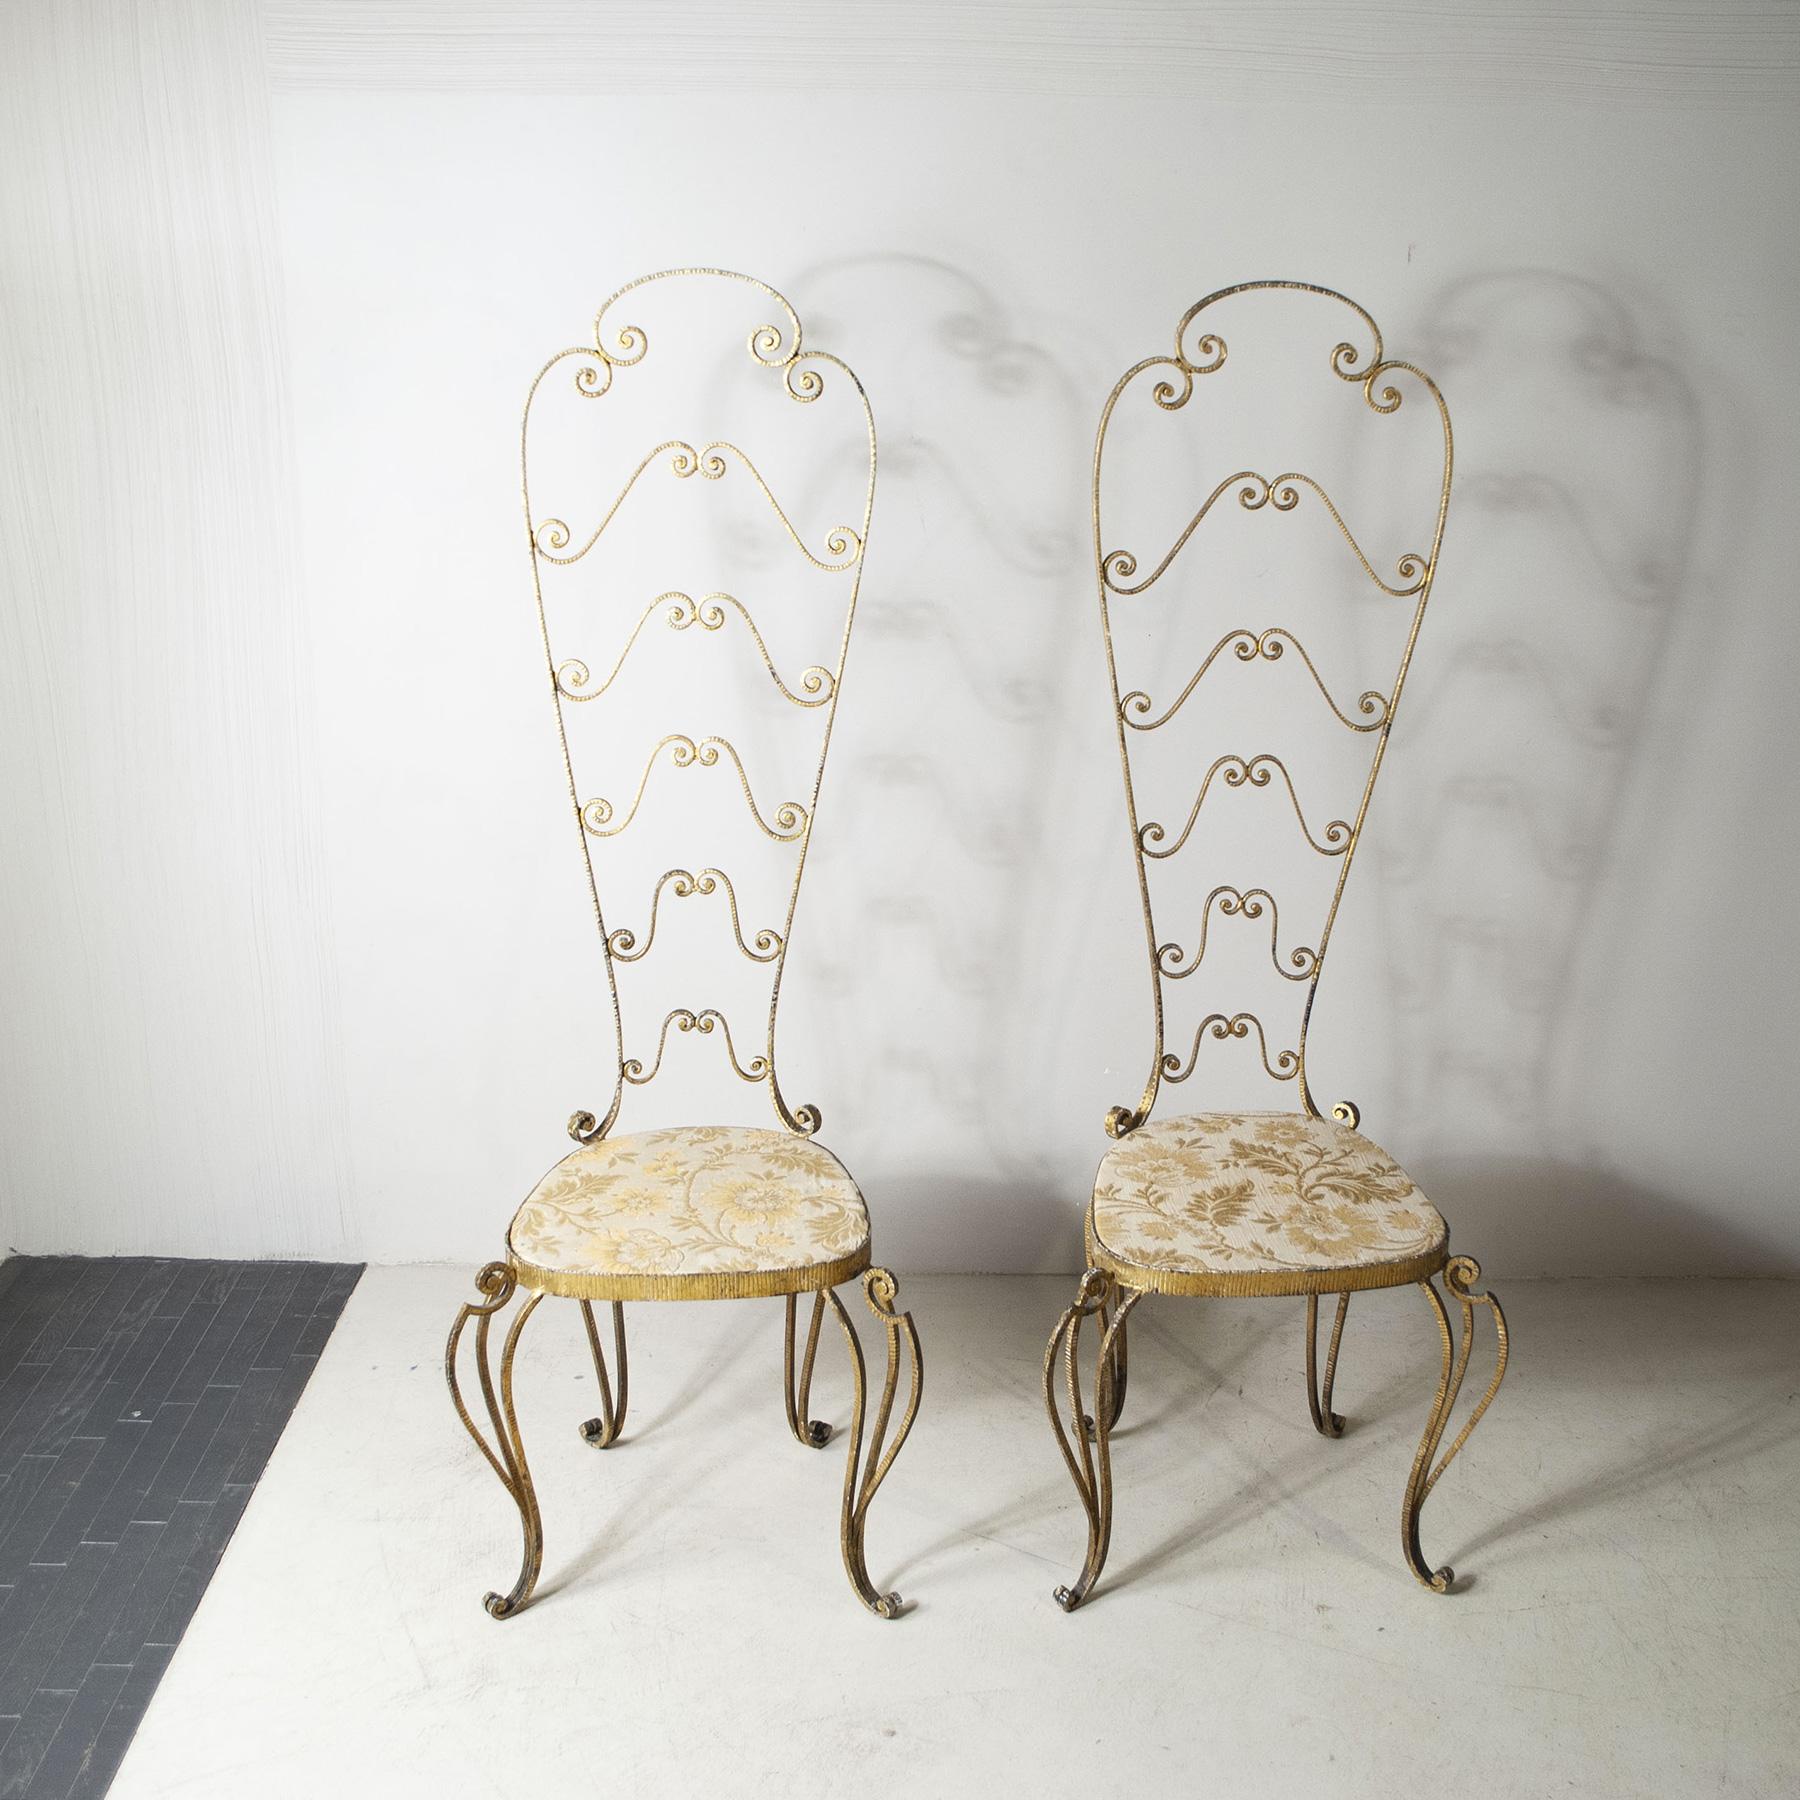 Set of two hammered gilt iron chairs from the famous Turin-based house Pierluigi Colli , production period 1960s.

